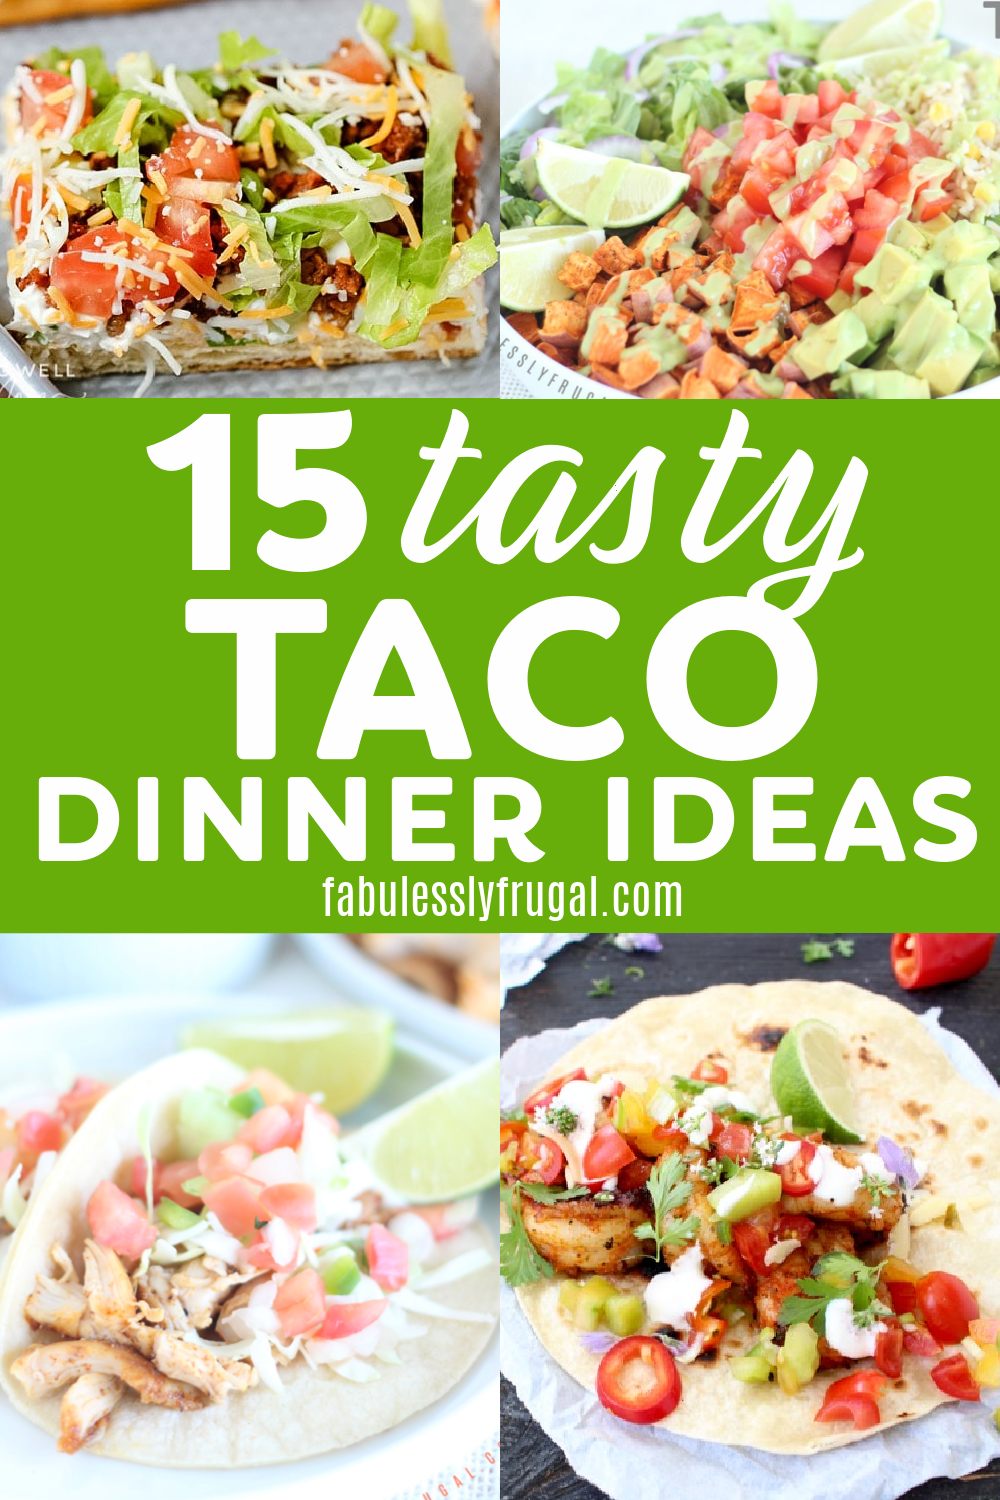 The 15 Best Taco Recipes Recipe - Fabulessly Frugal